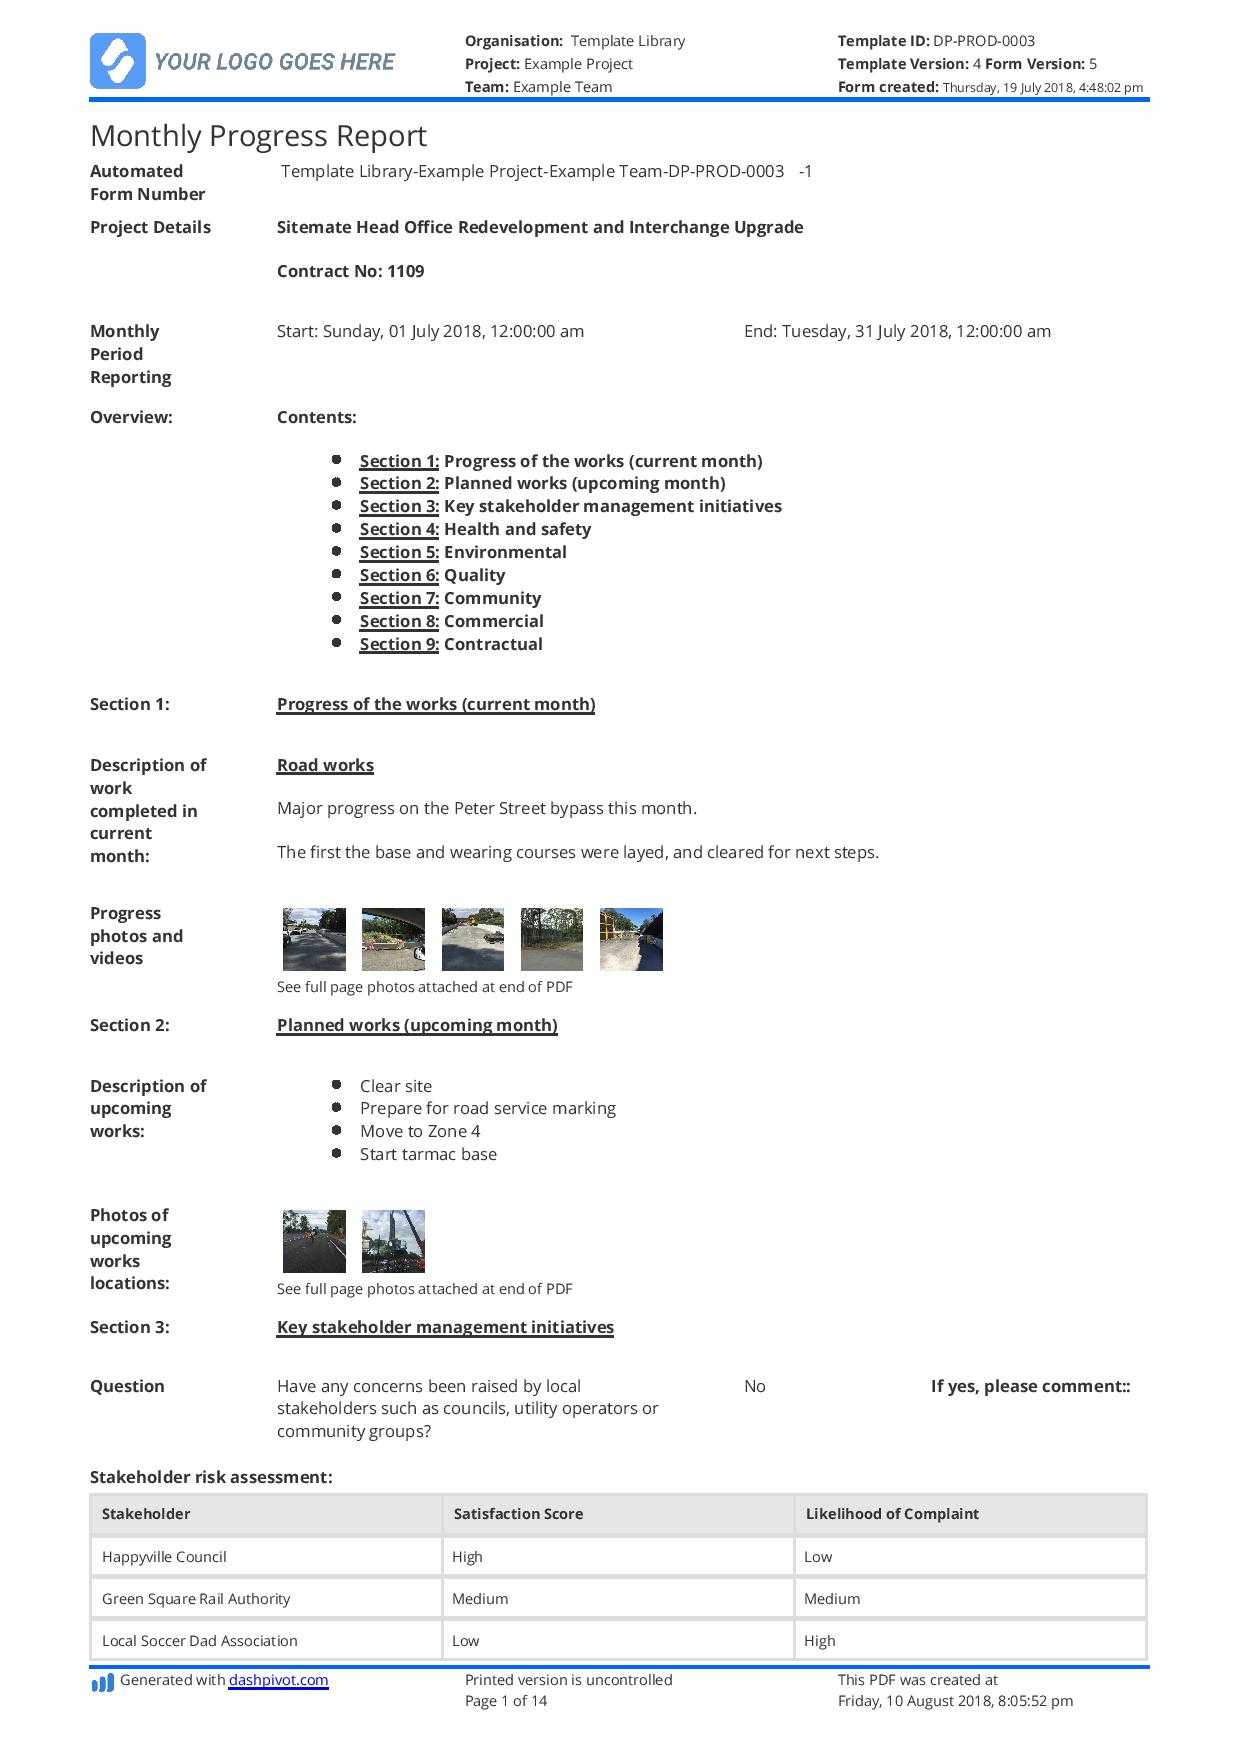 Monthly Construction Progress Report Template: Use This Regarding How To Write A Monthly Report Template